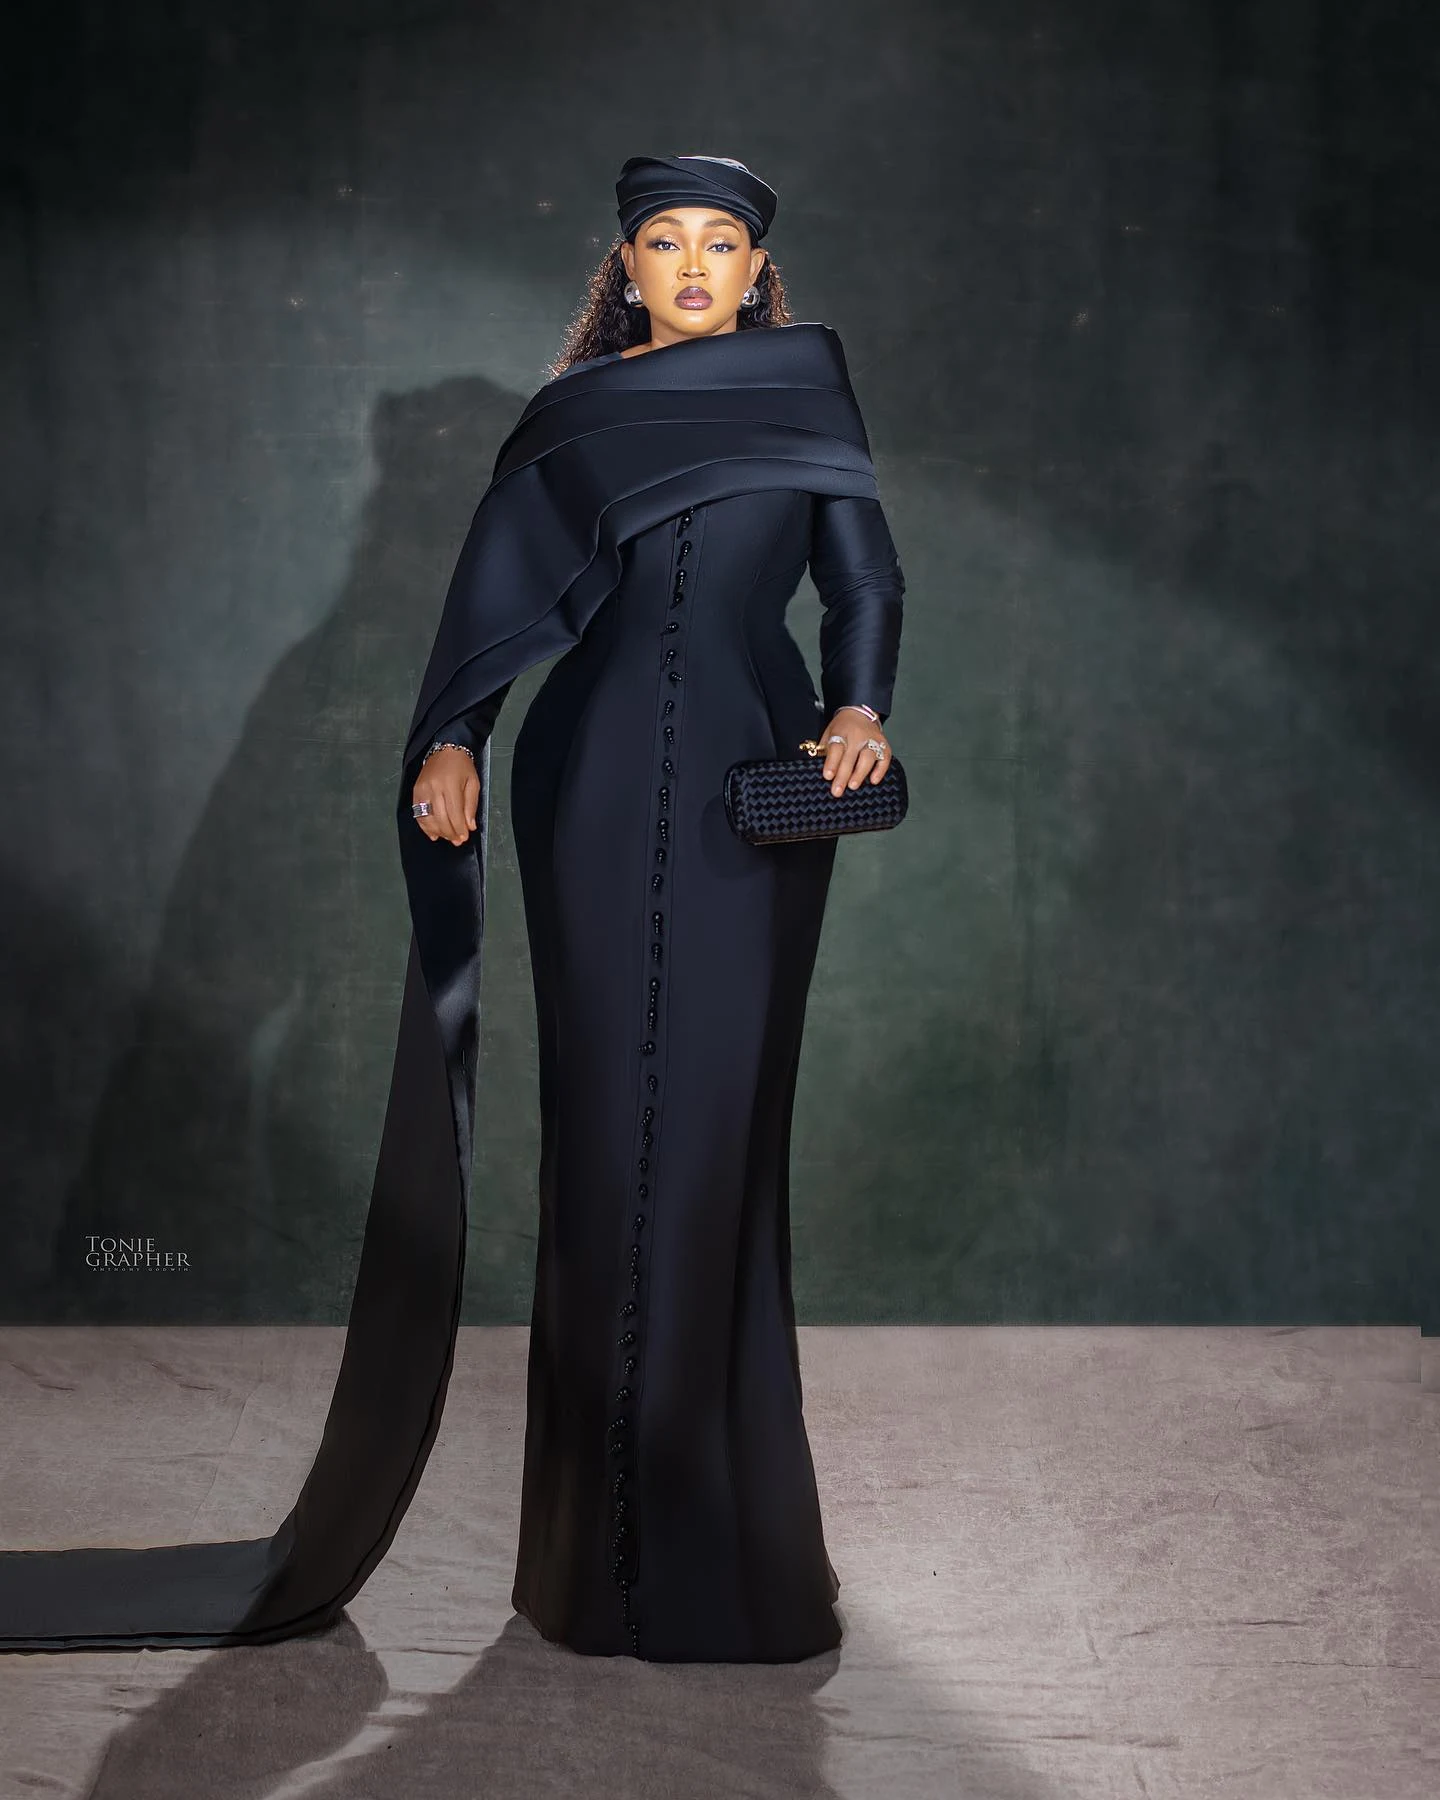 Adorable recent pictures of actress Mercy Aigbe